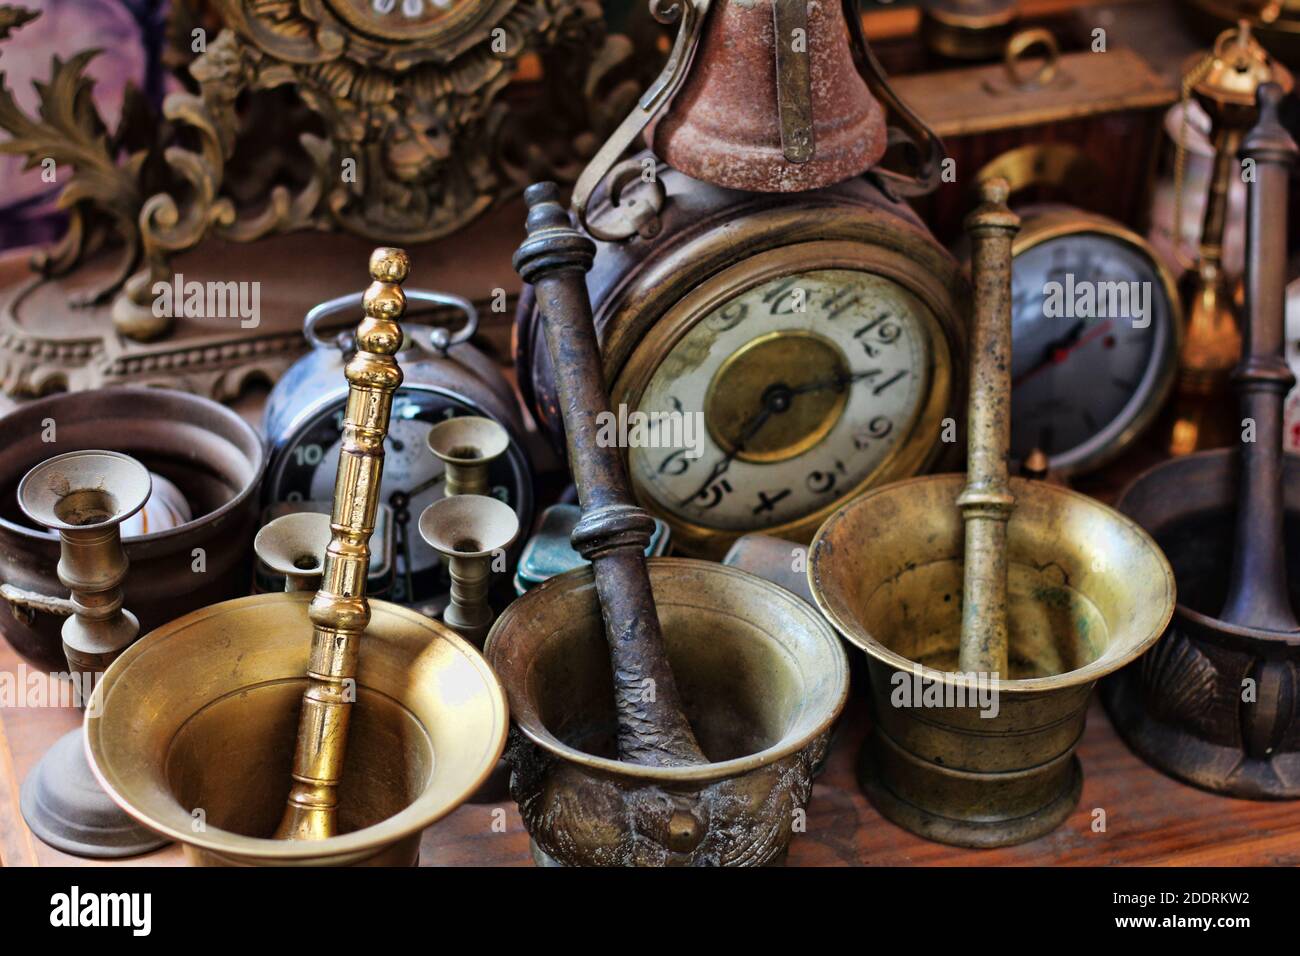 https://c8.alamy.com/comp/2DDRKW2/a-closeup-of-antique-metallic-mortars-candle-holders-alarm-clocks-and-a-table-clock-2DDRKW2.jpg